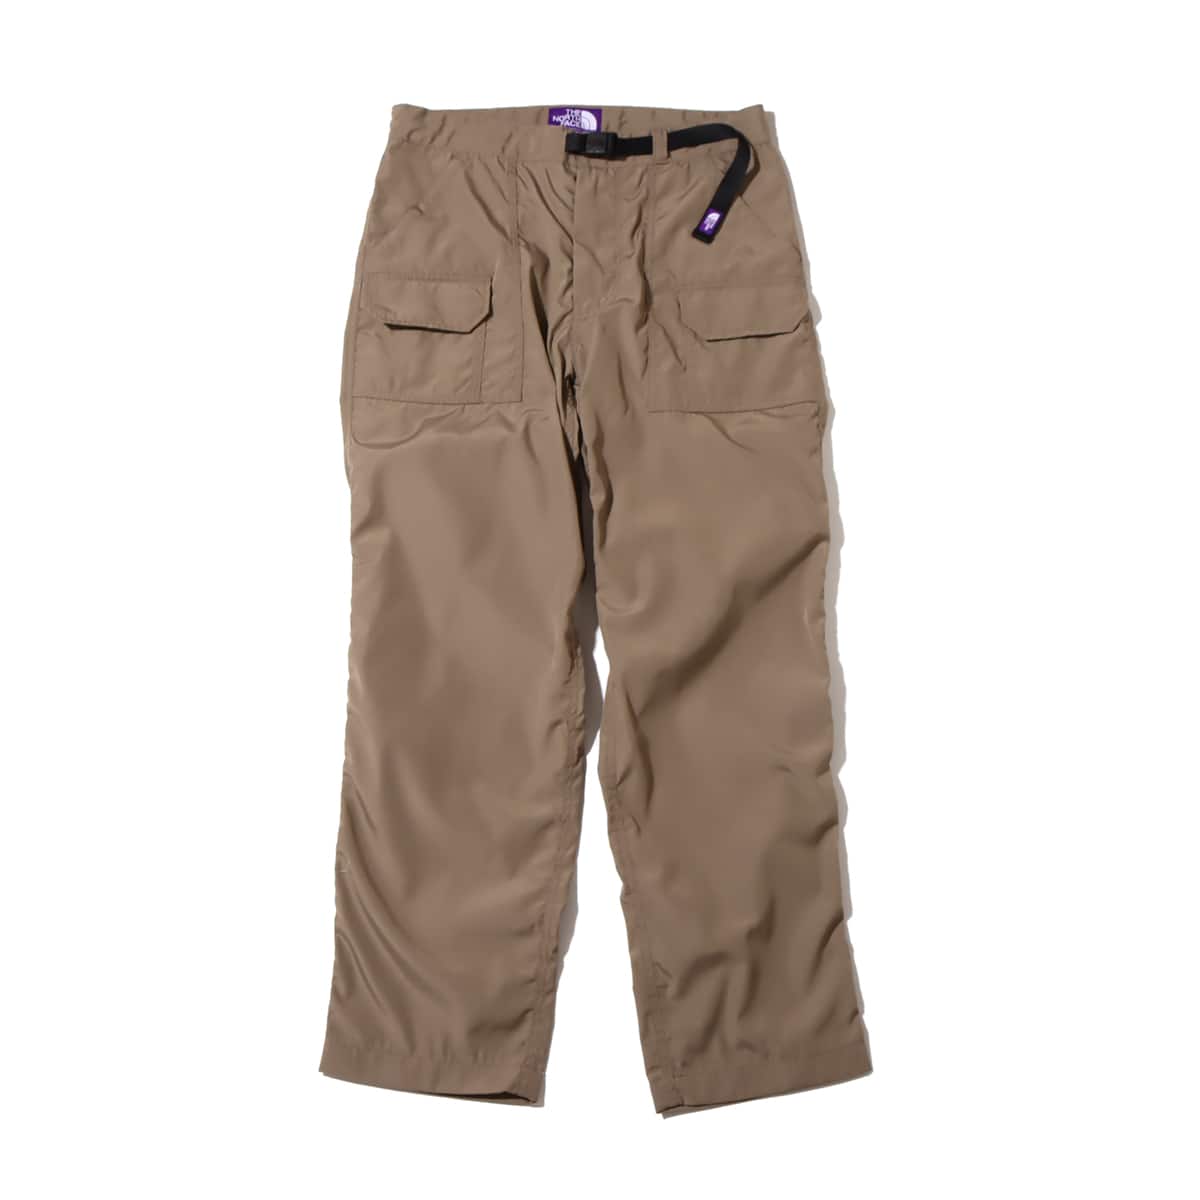 THE NORTH FACE PURPLE LABEL Polyester Wool Ripstop Trail Pants